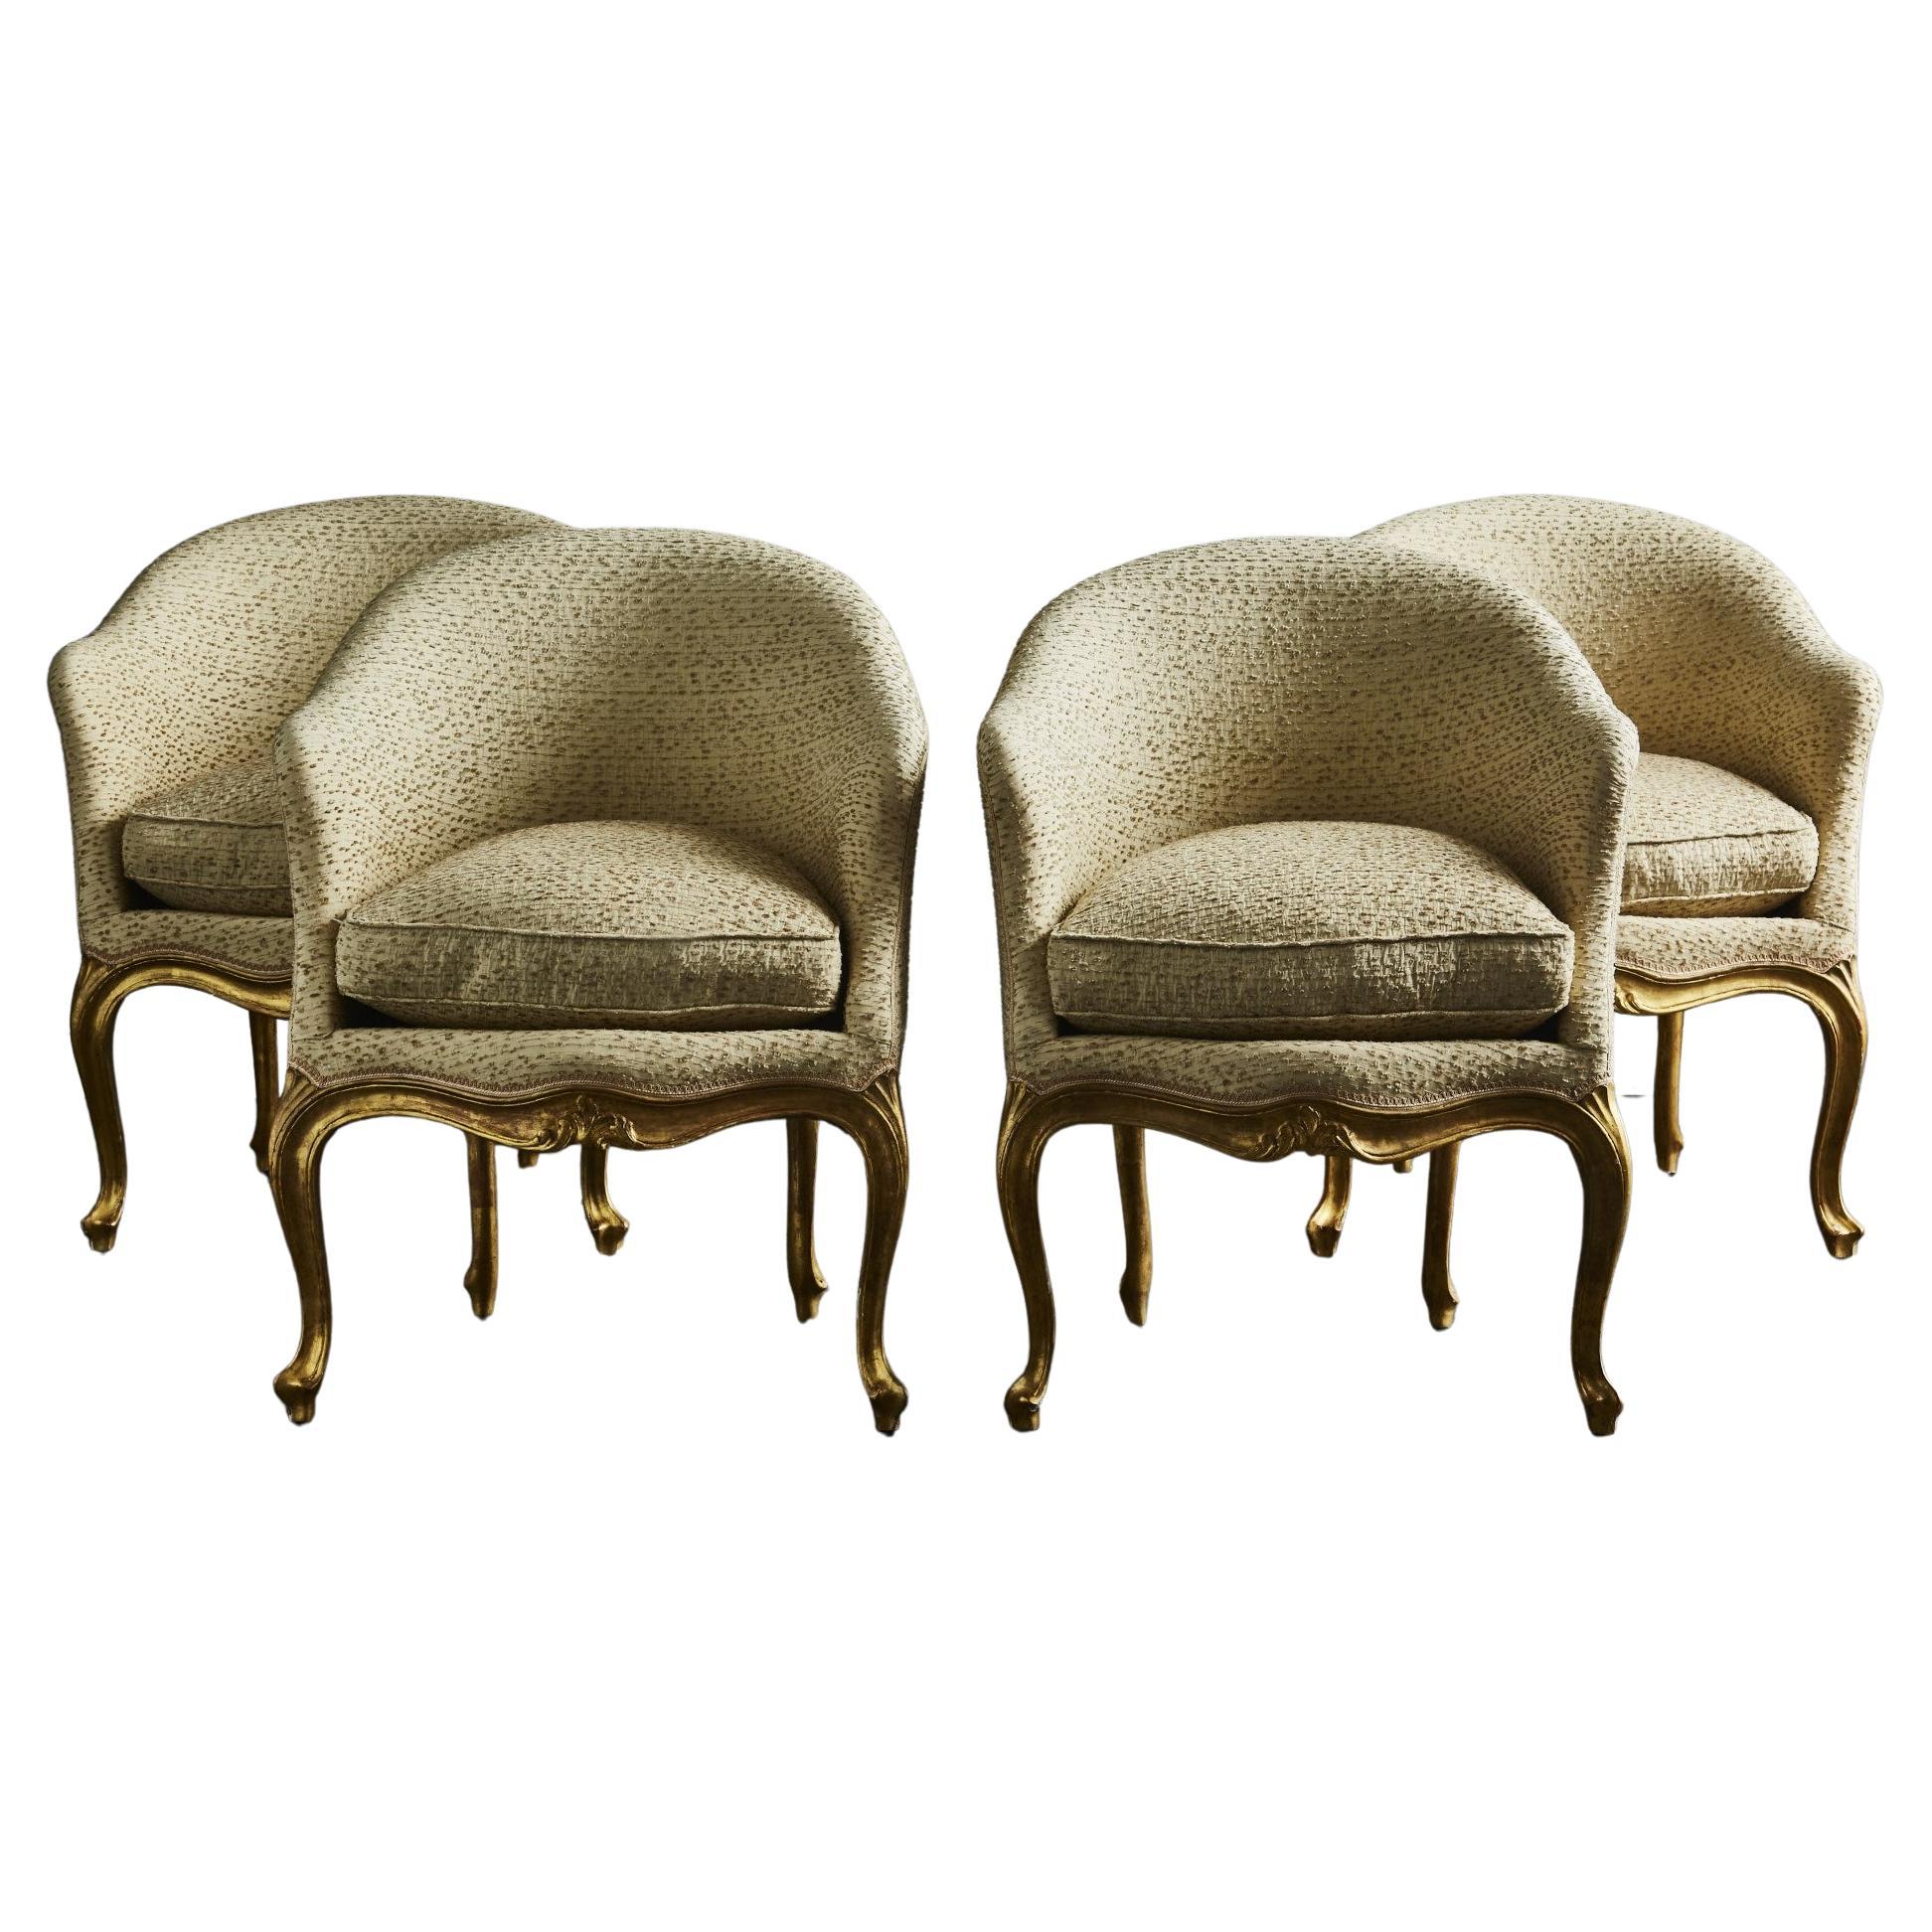 4 armchairs Louis XIV style, 19th century At Cost Price